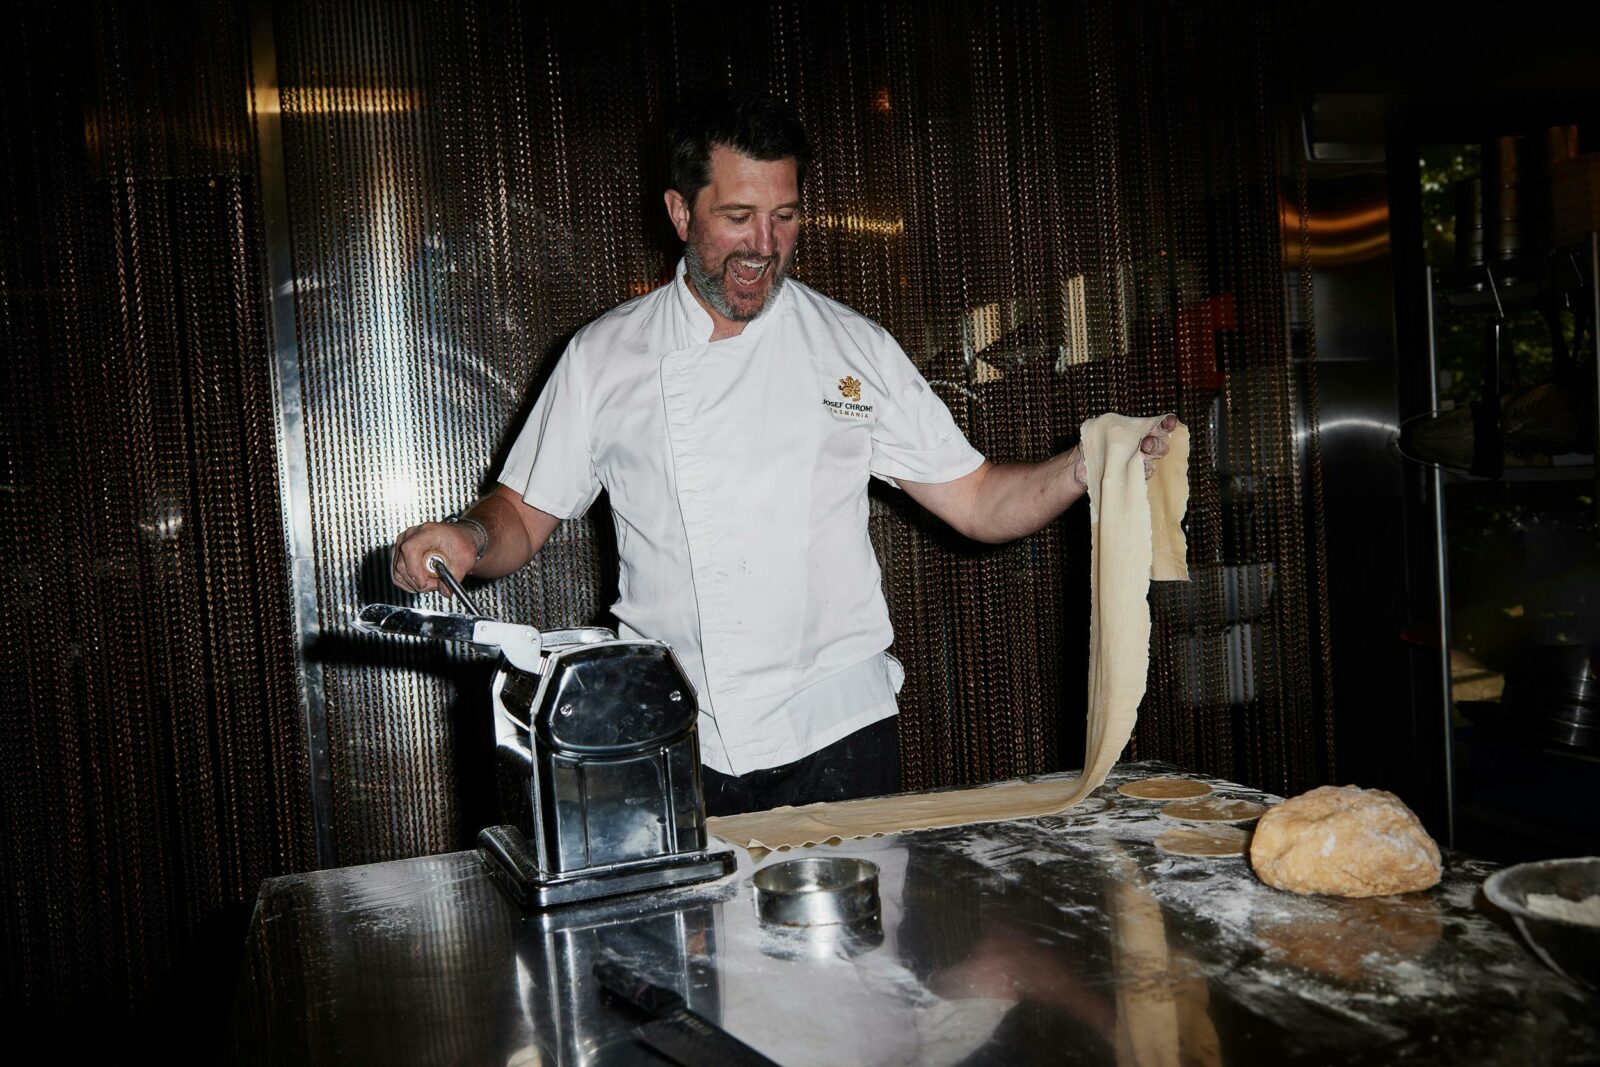 A smiling chef rolls pasta in a commercial kitchen at Josef Chromy Restaurant